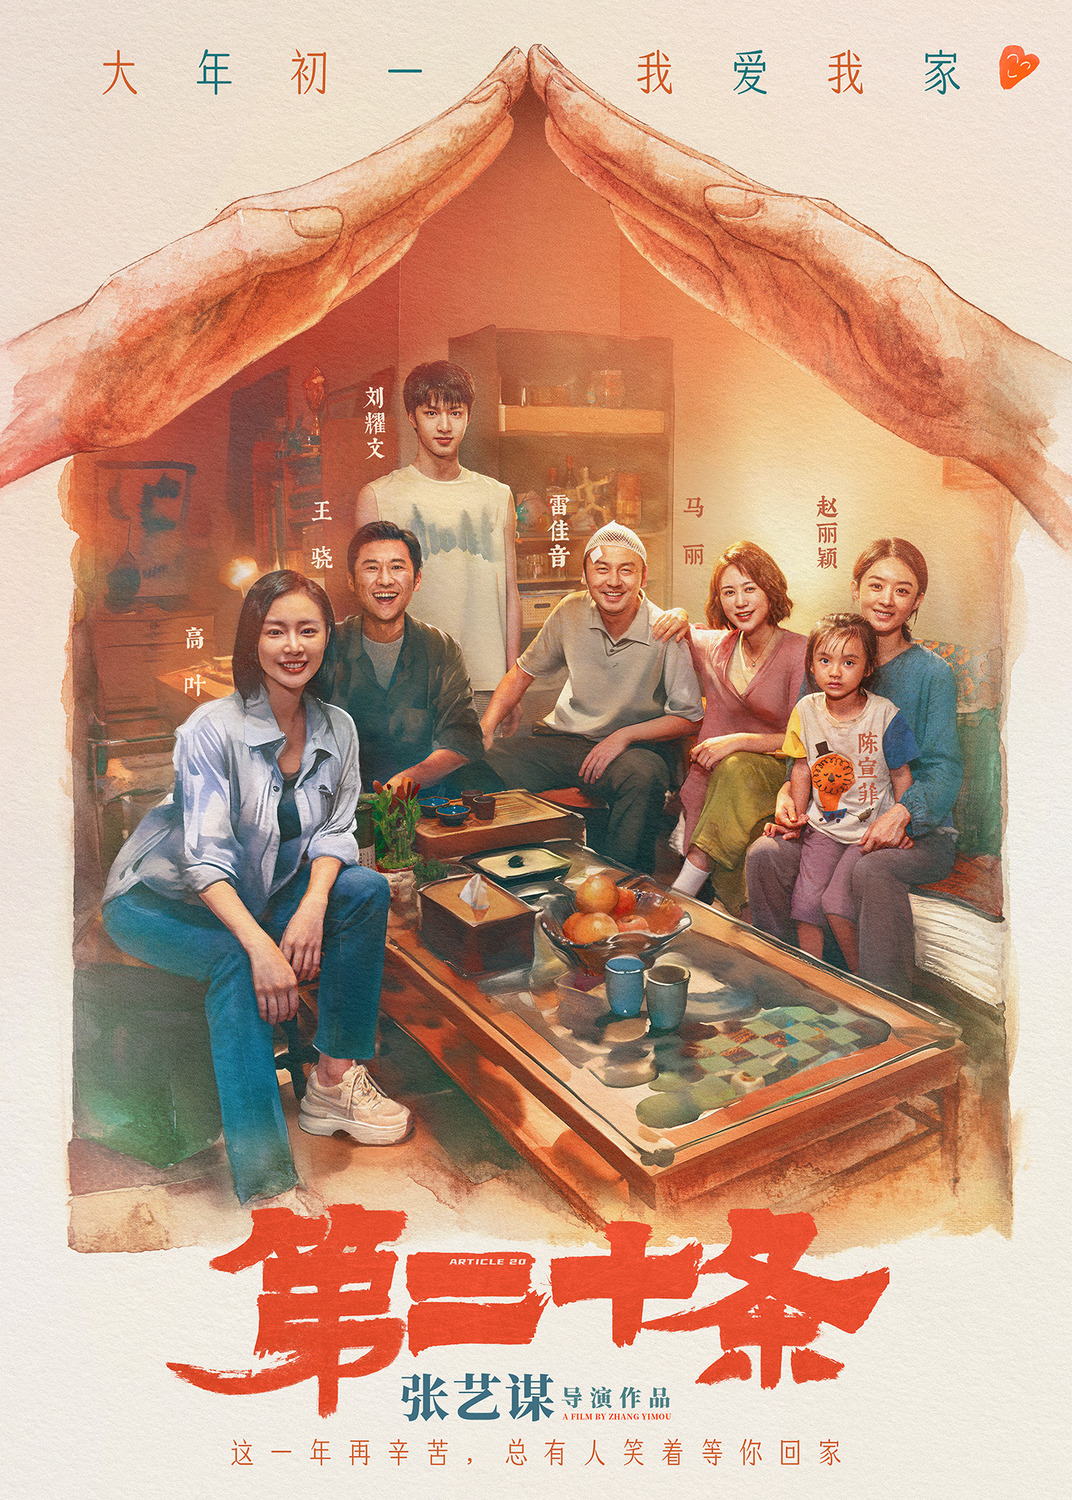 Extra Large Movie Poster Image for Di er shi tiao 